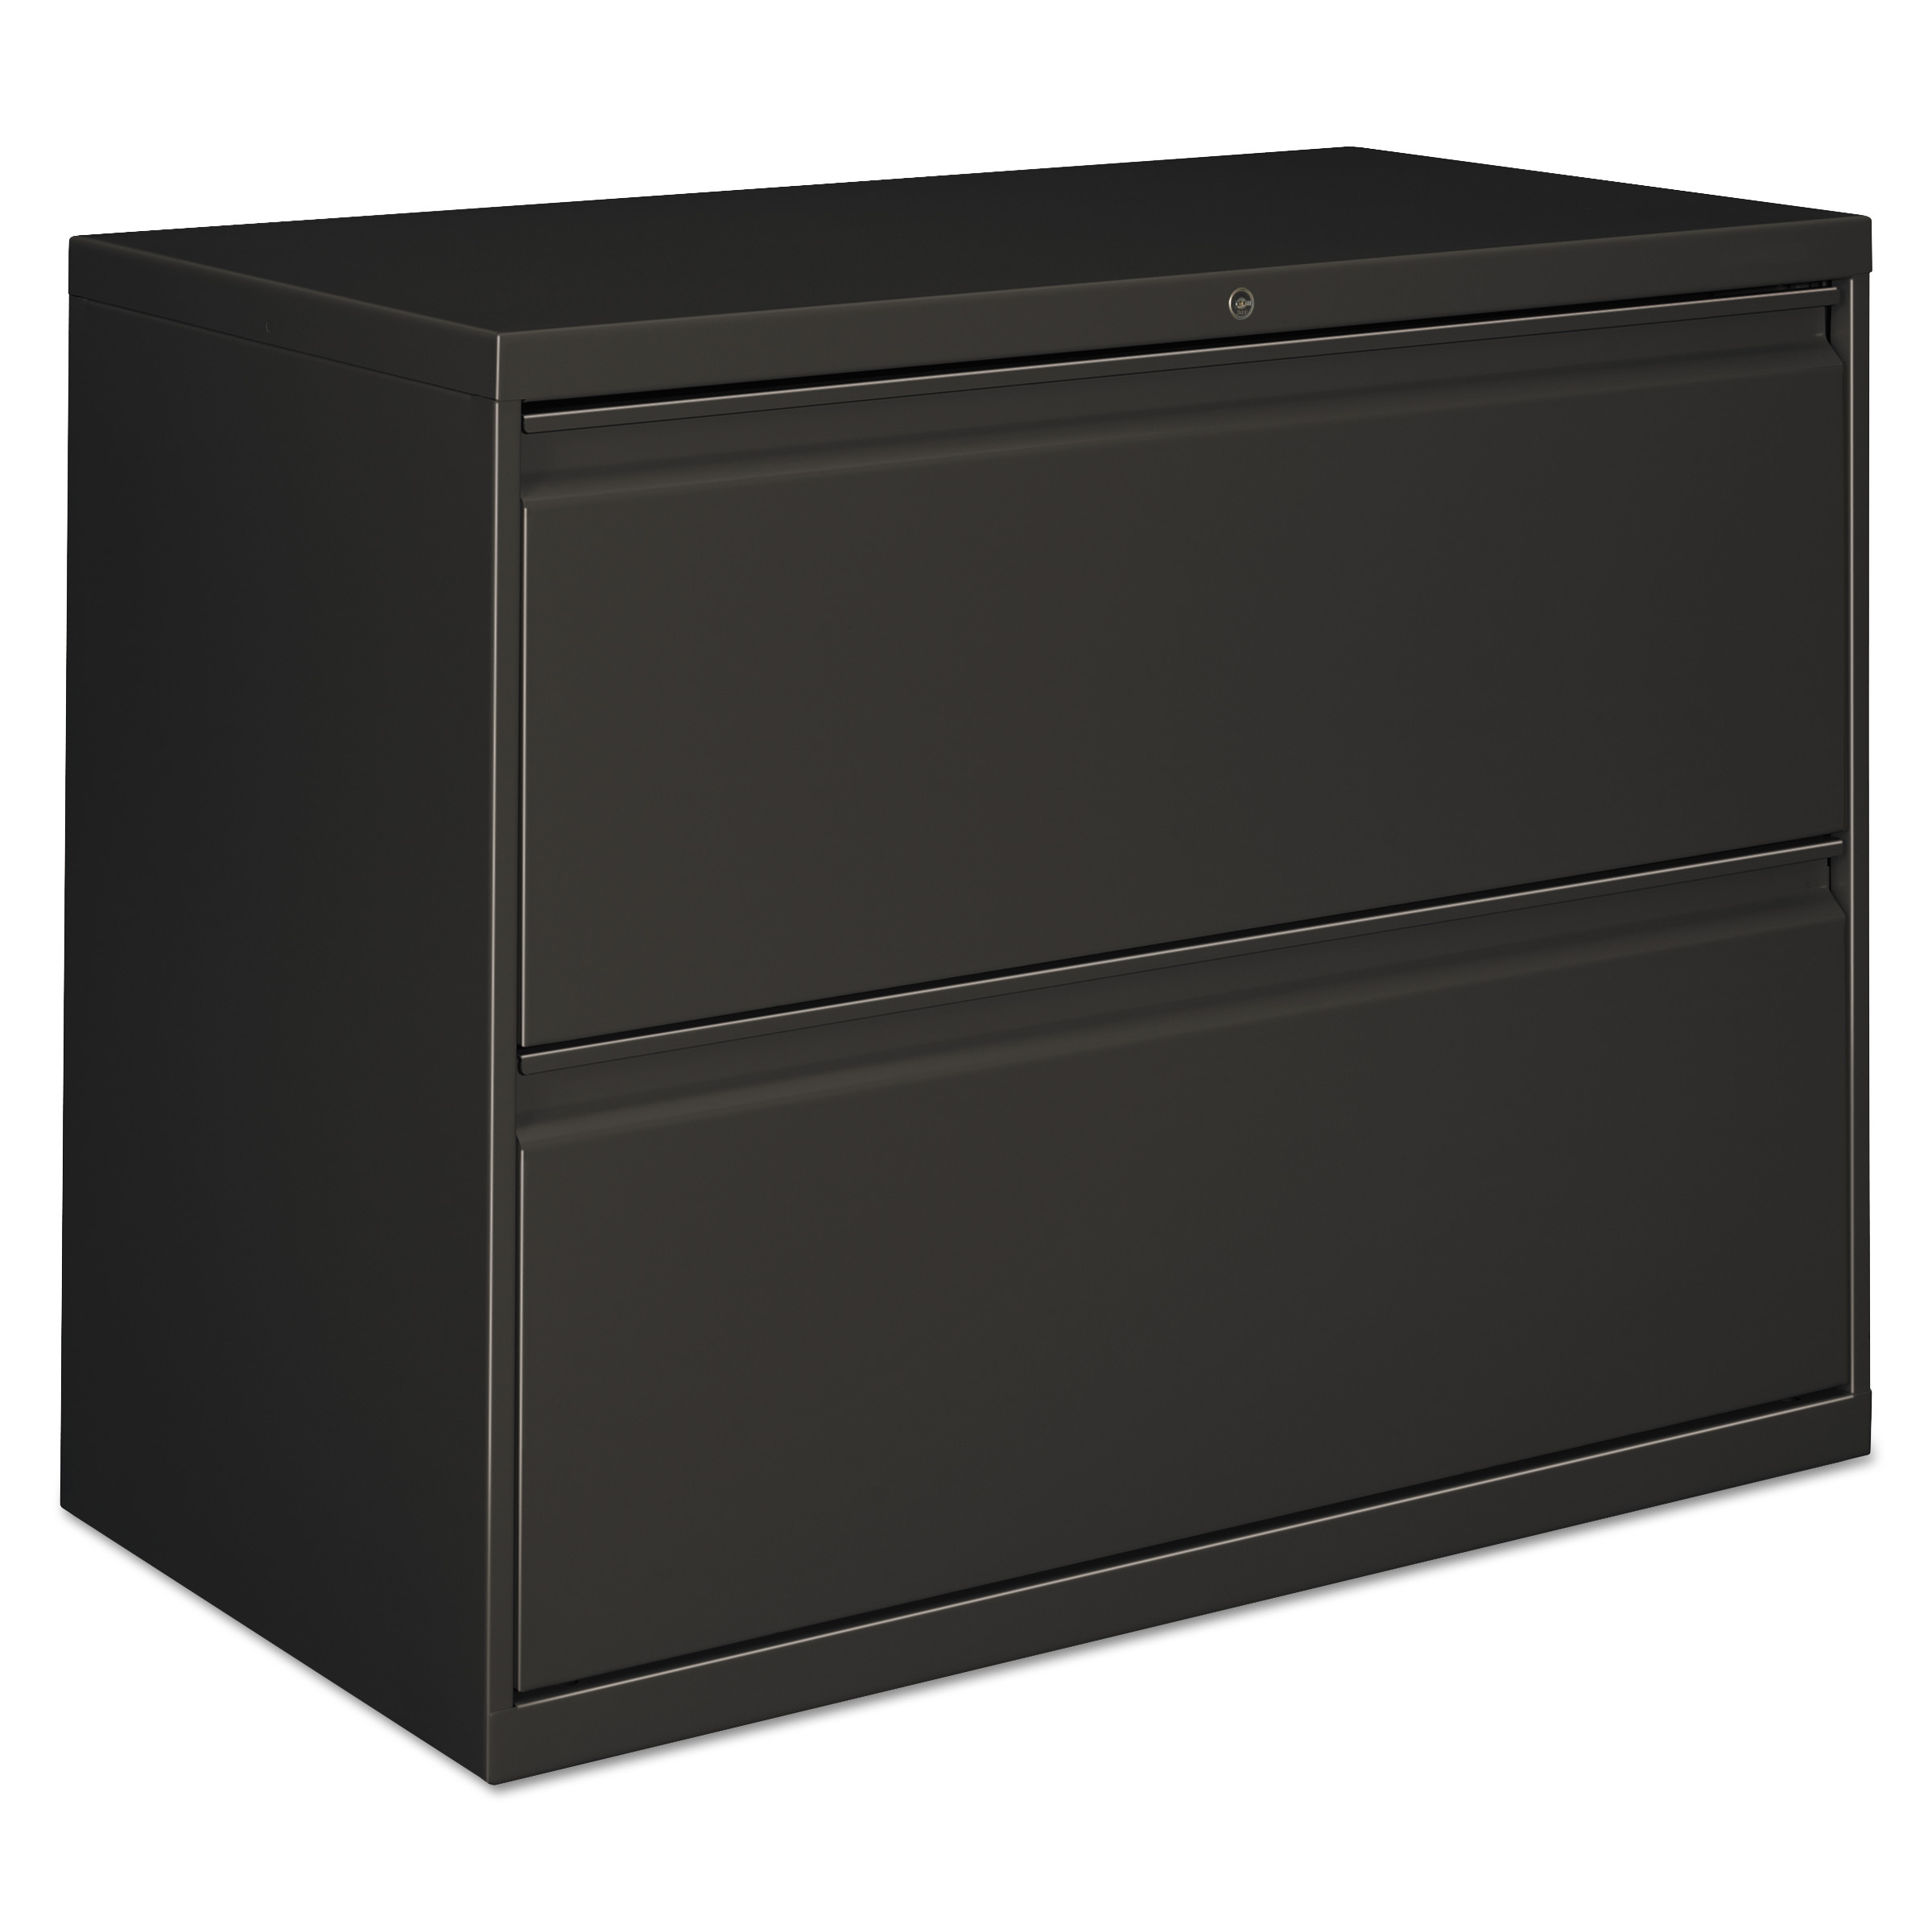 Alera Lateral File, 2 Drawer, 30w x 19.25d x 28.38h, Charcoal - image 1 of 2